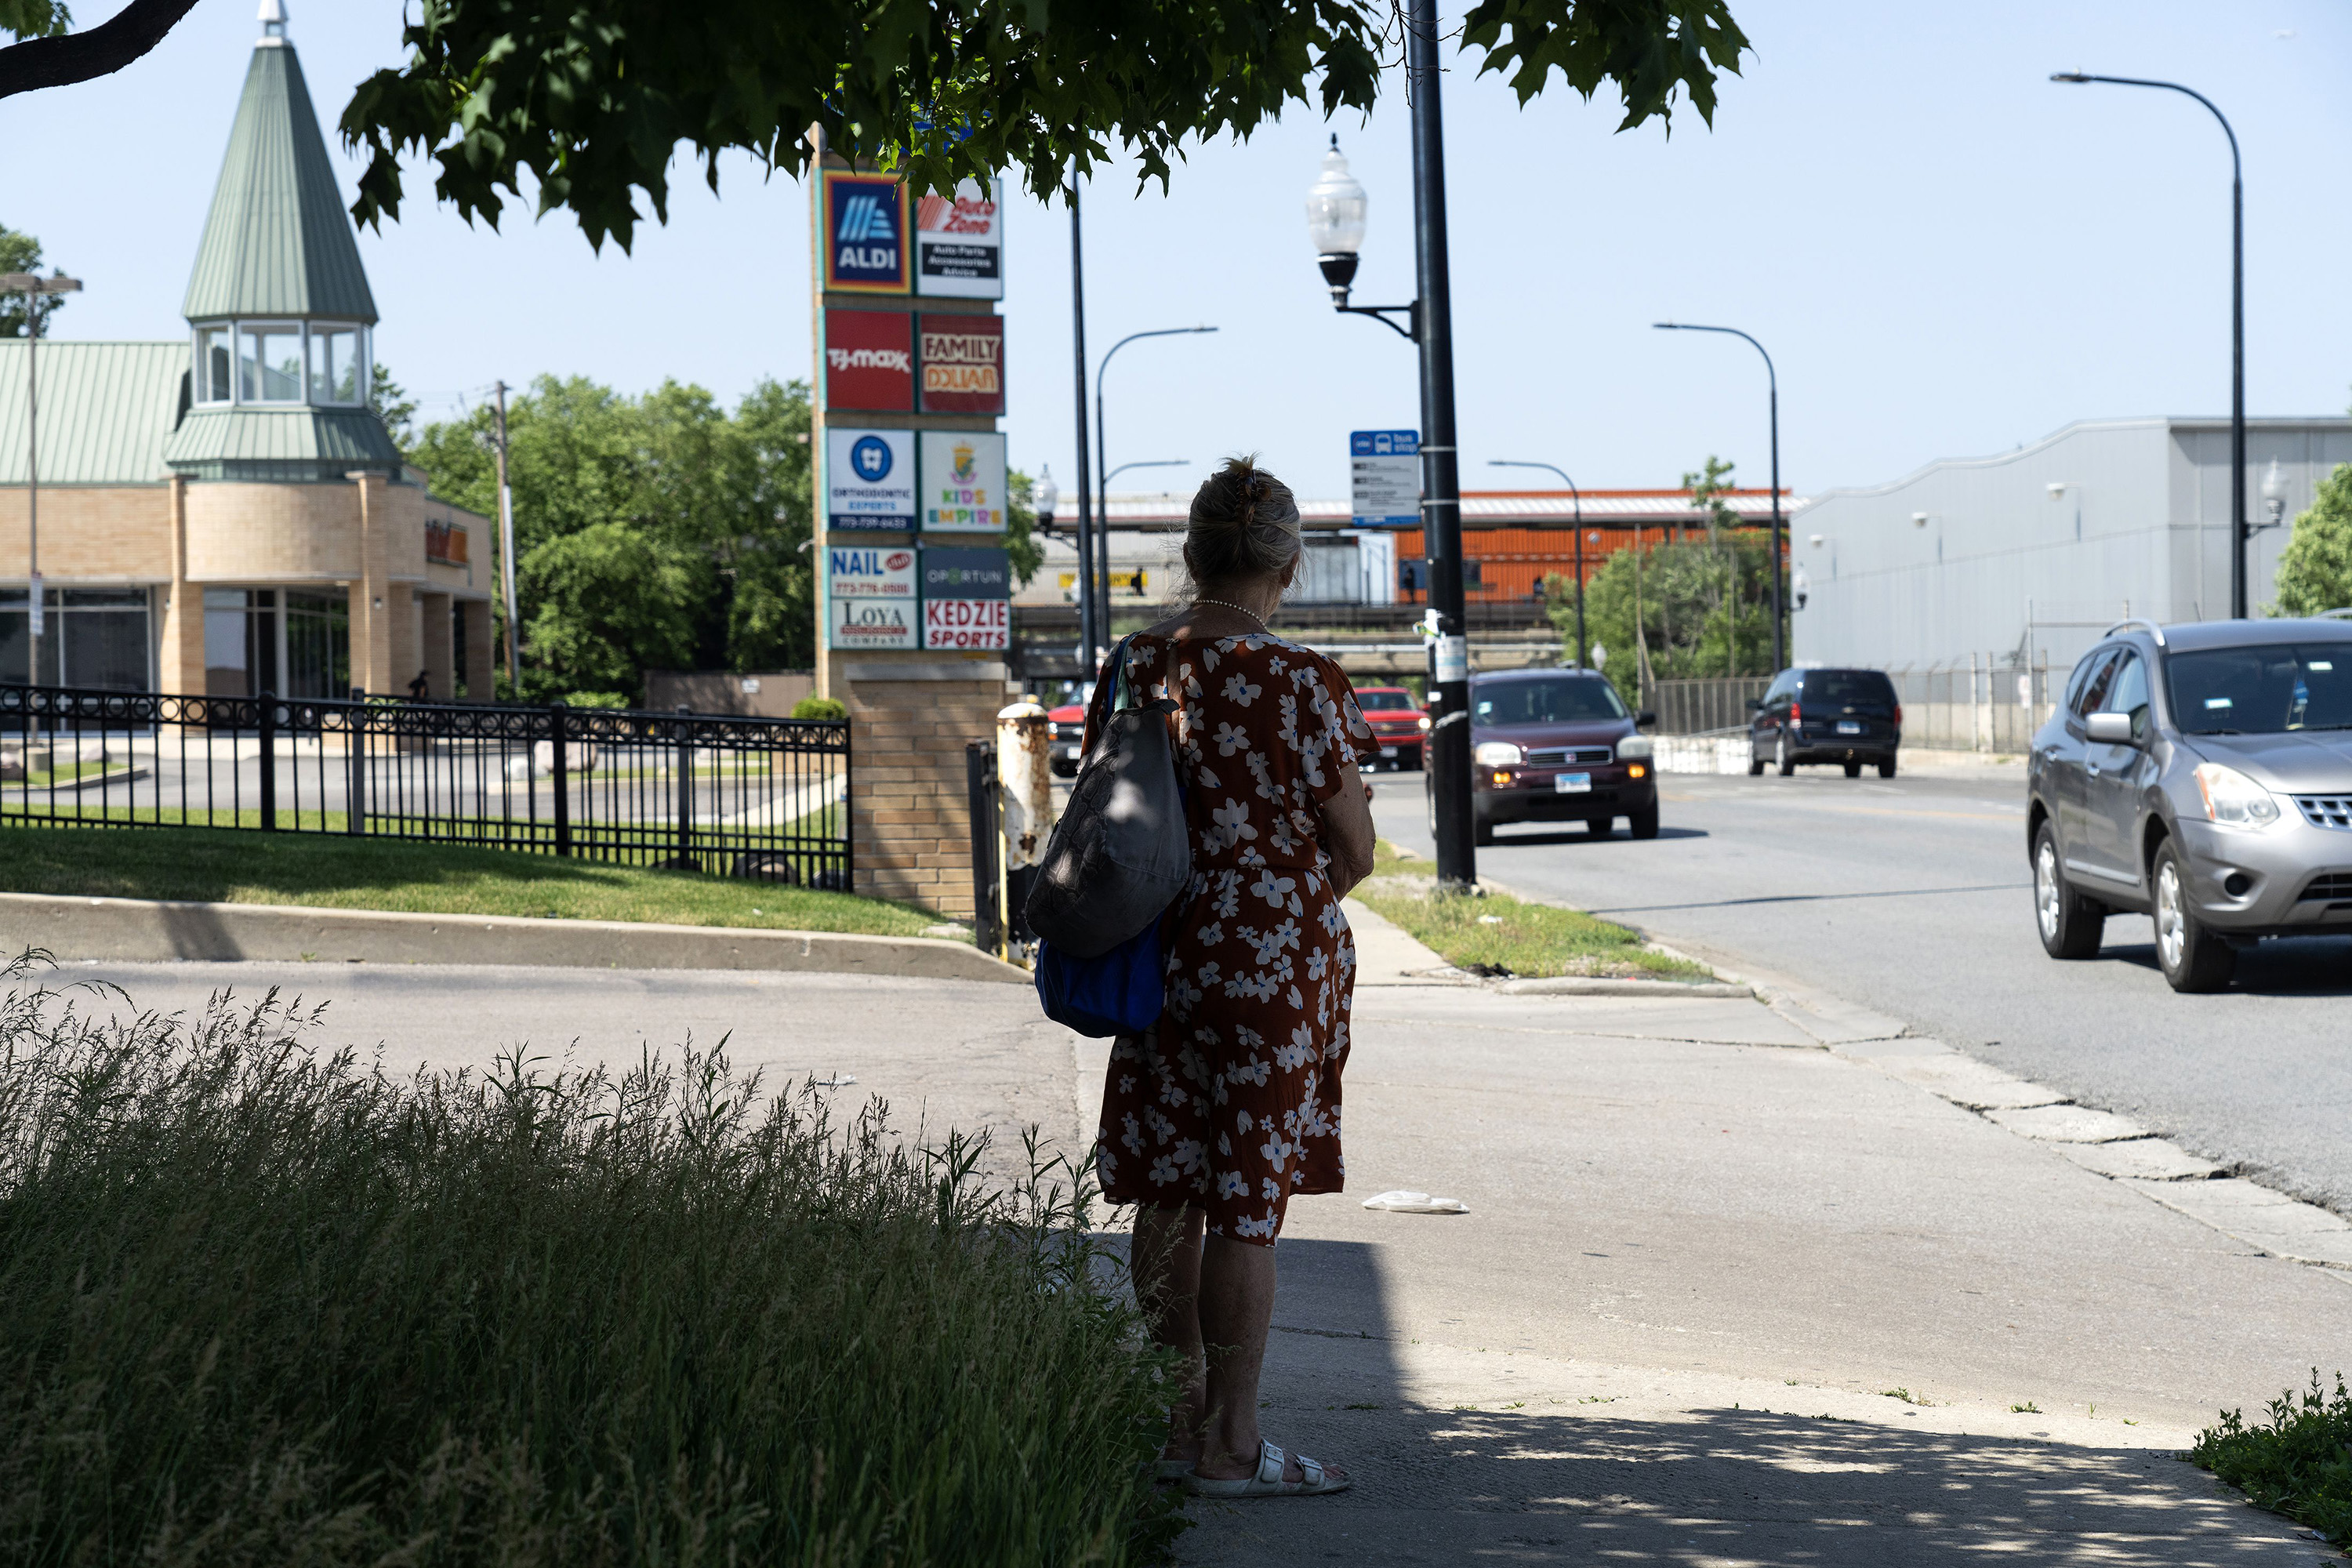 A commuter in Chicago stands in the shade waiting for her bus.